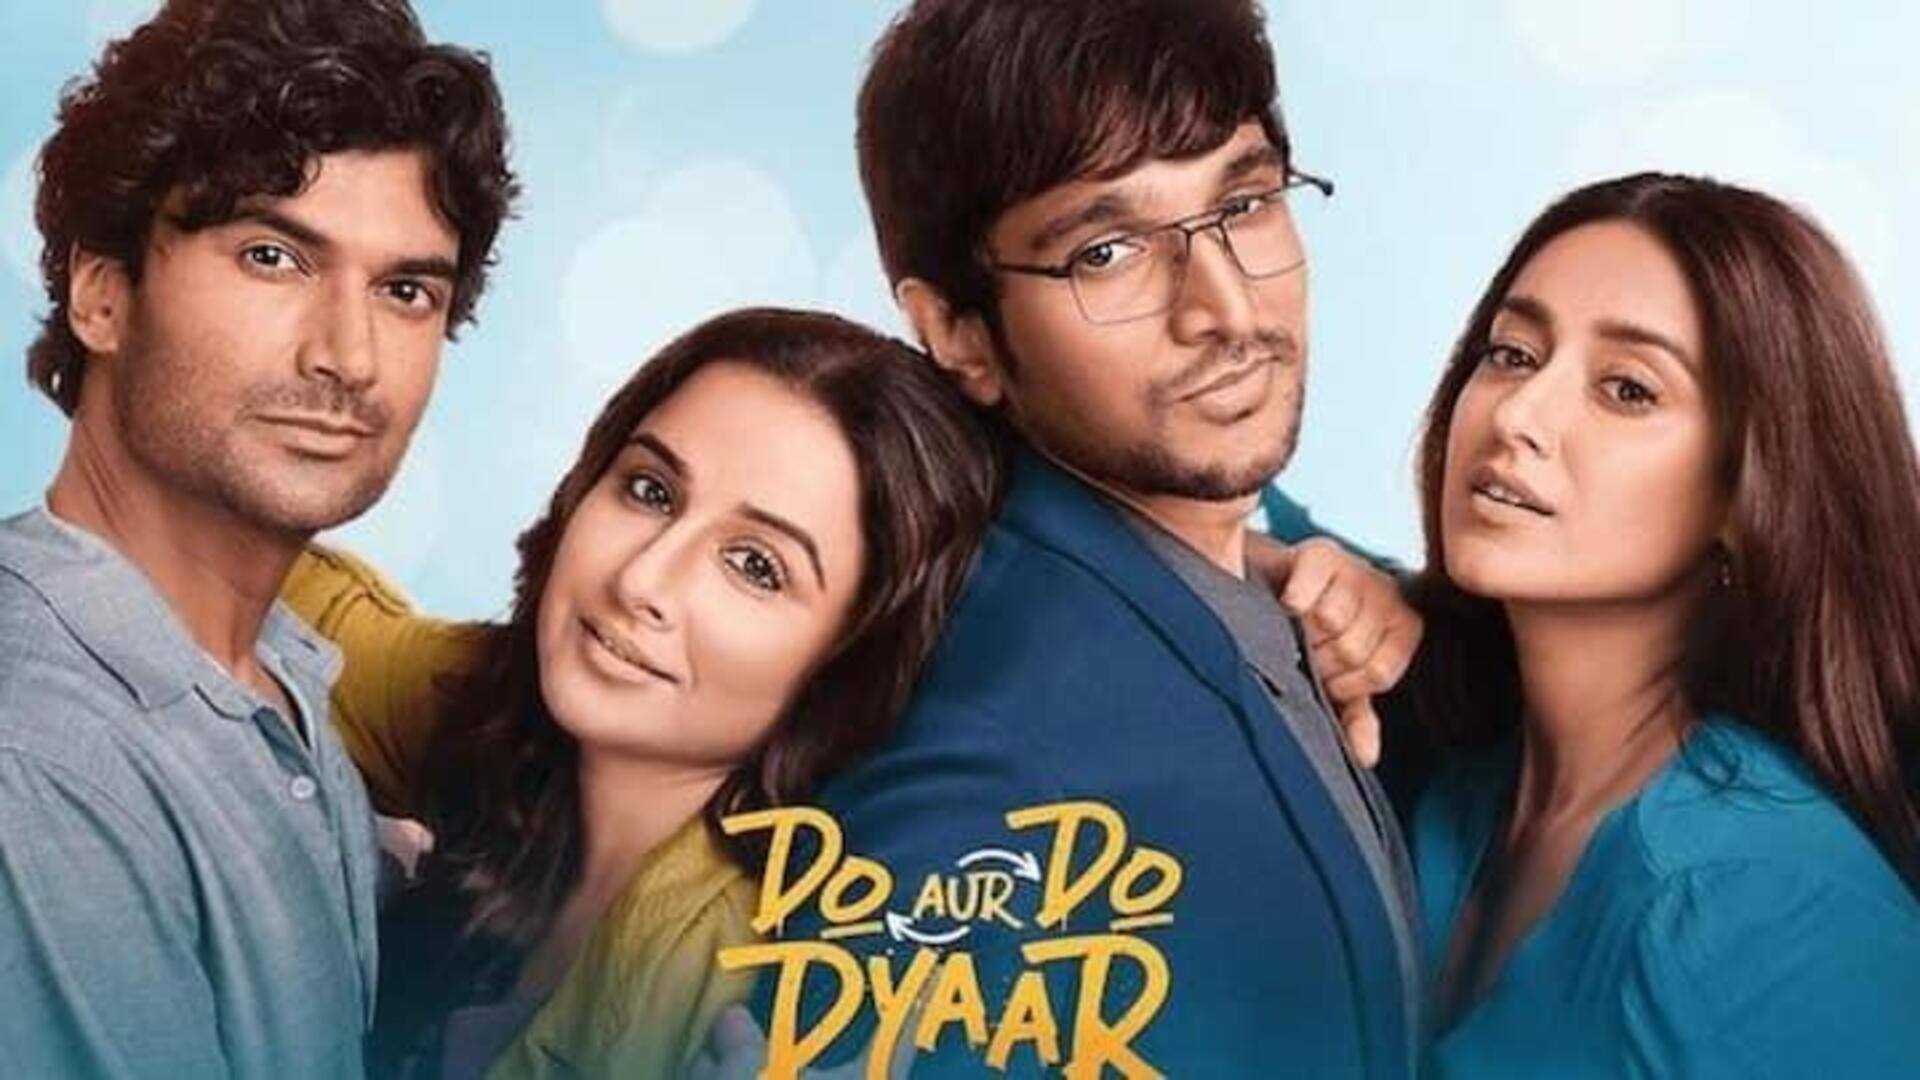 'Do Aur Do Pyaar' box office collection remains disappointing